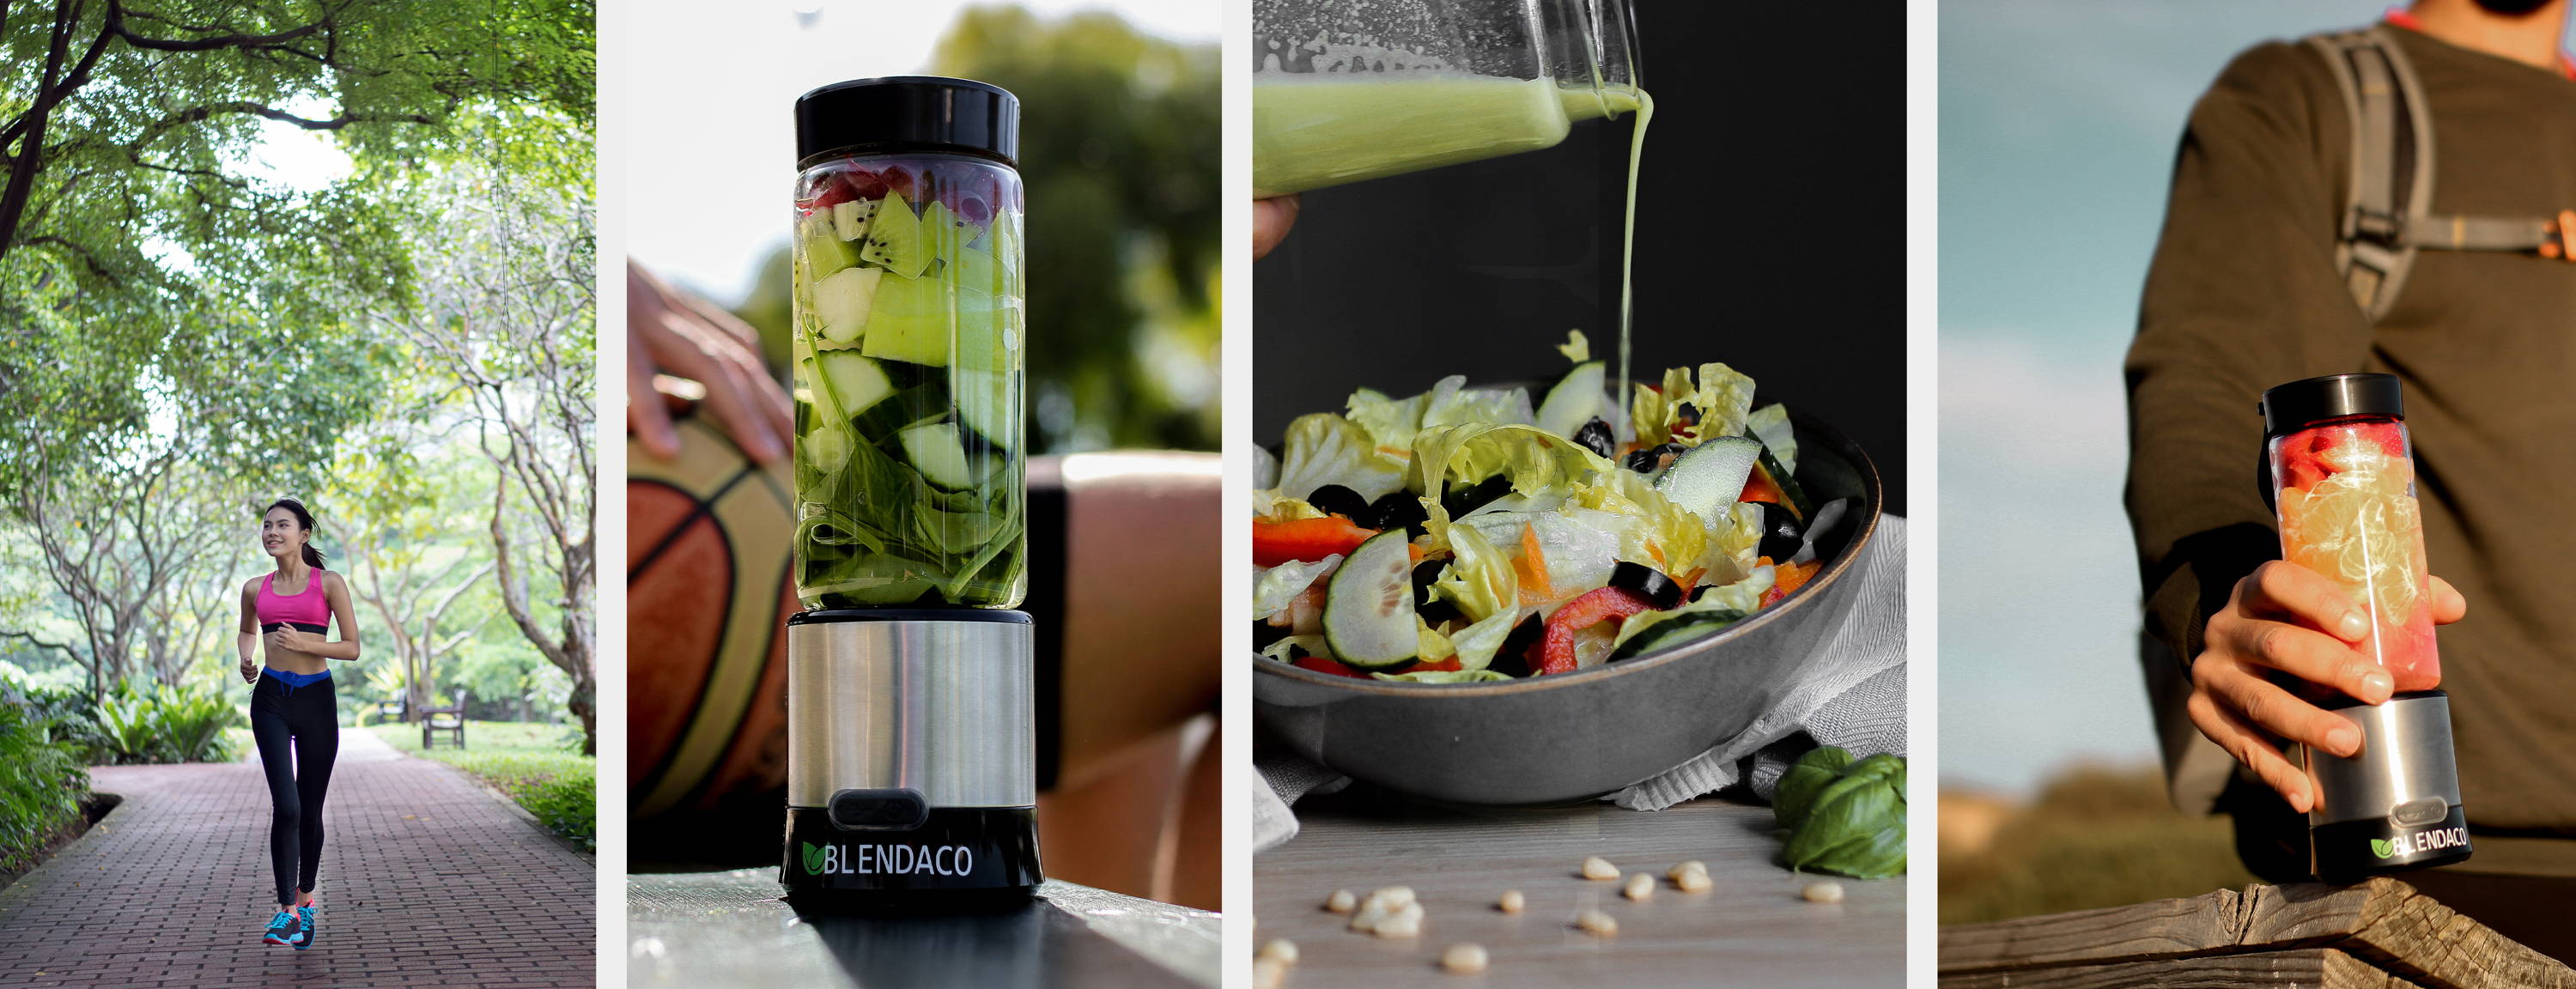 Smoothies And Fresh Juice. Portable Blender For On The Go Smoothies, Juice,  And More